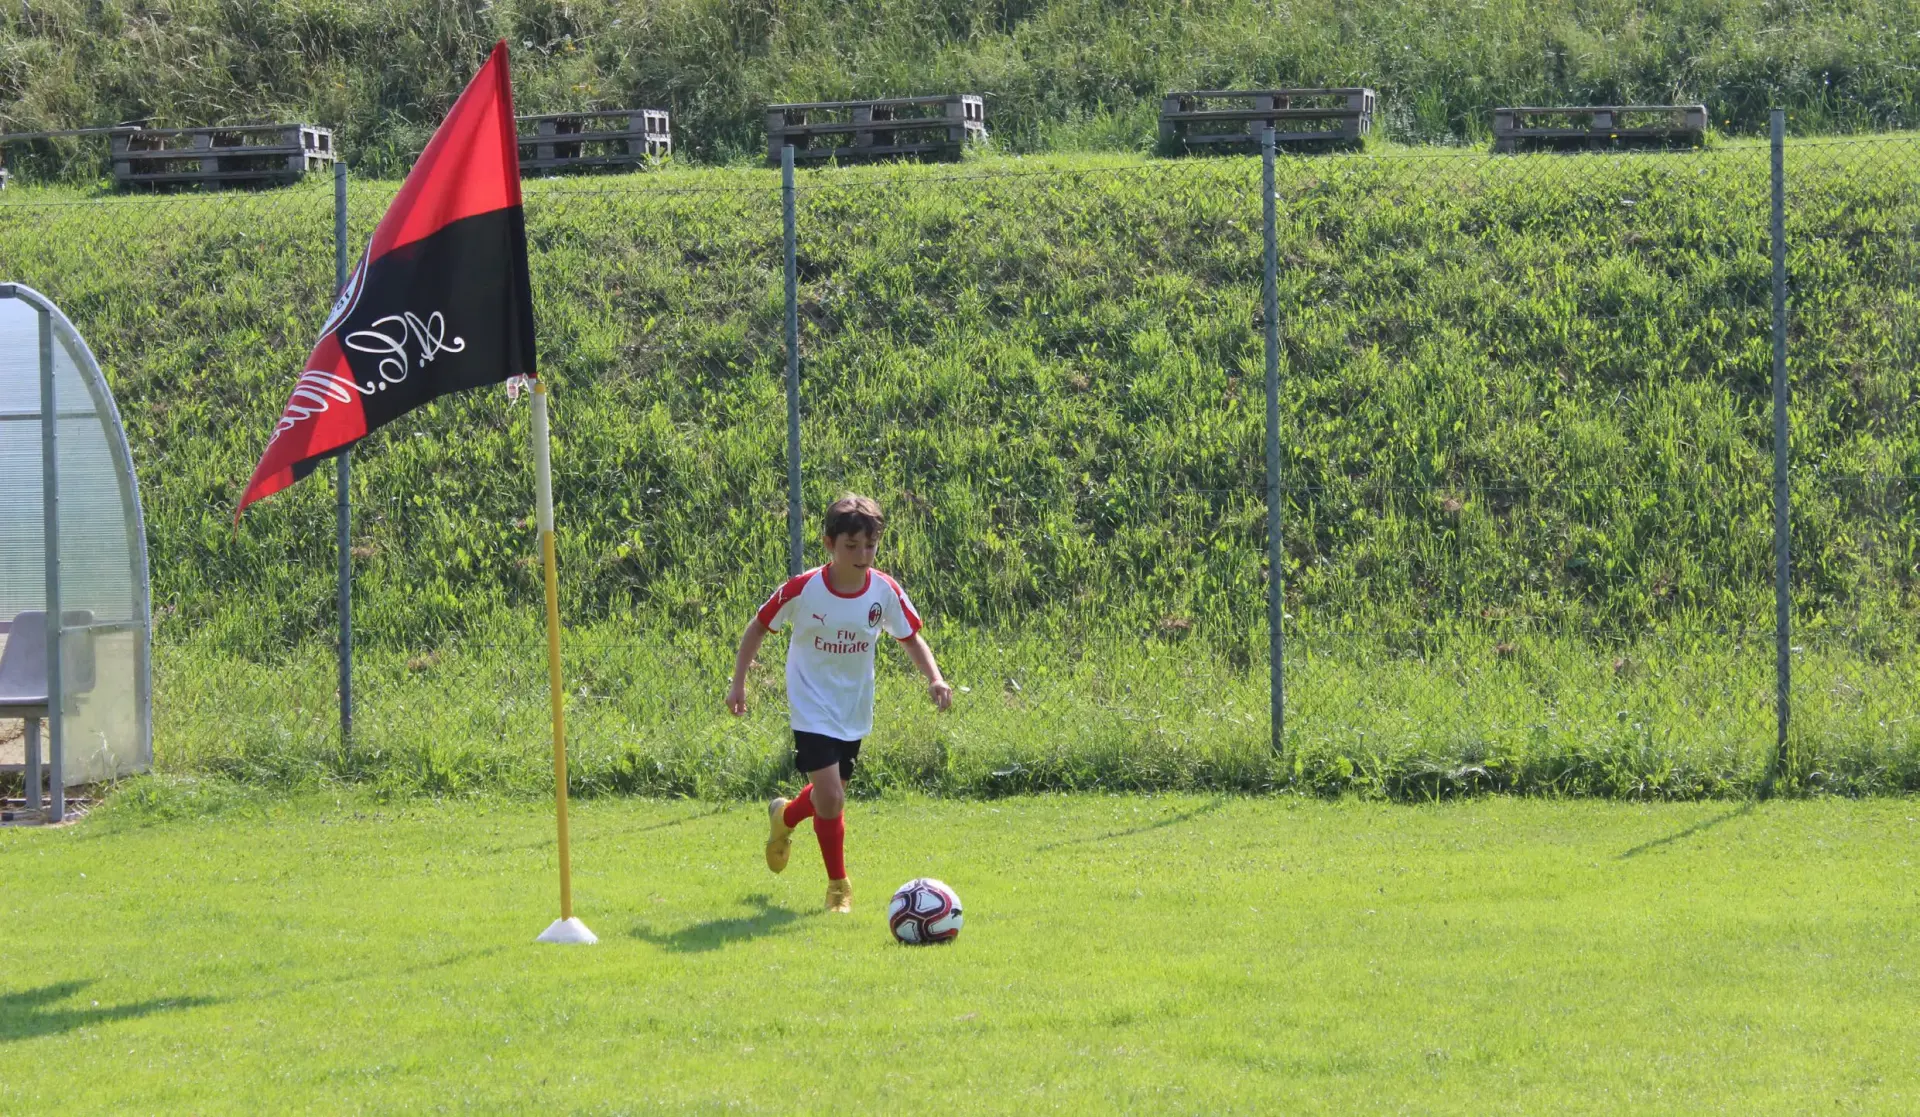 Child during the training in the AC Milan Soccer Academy Camp on Demand